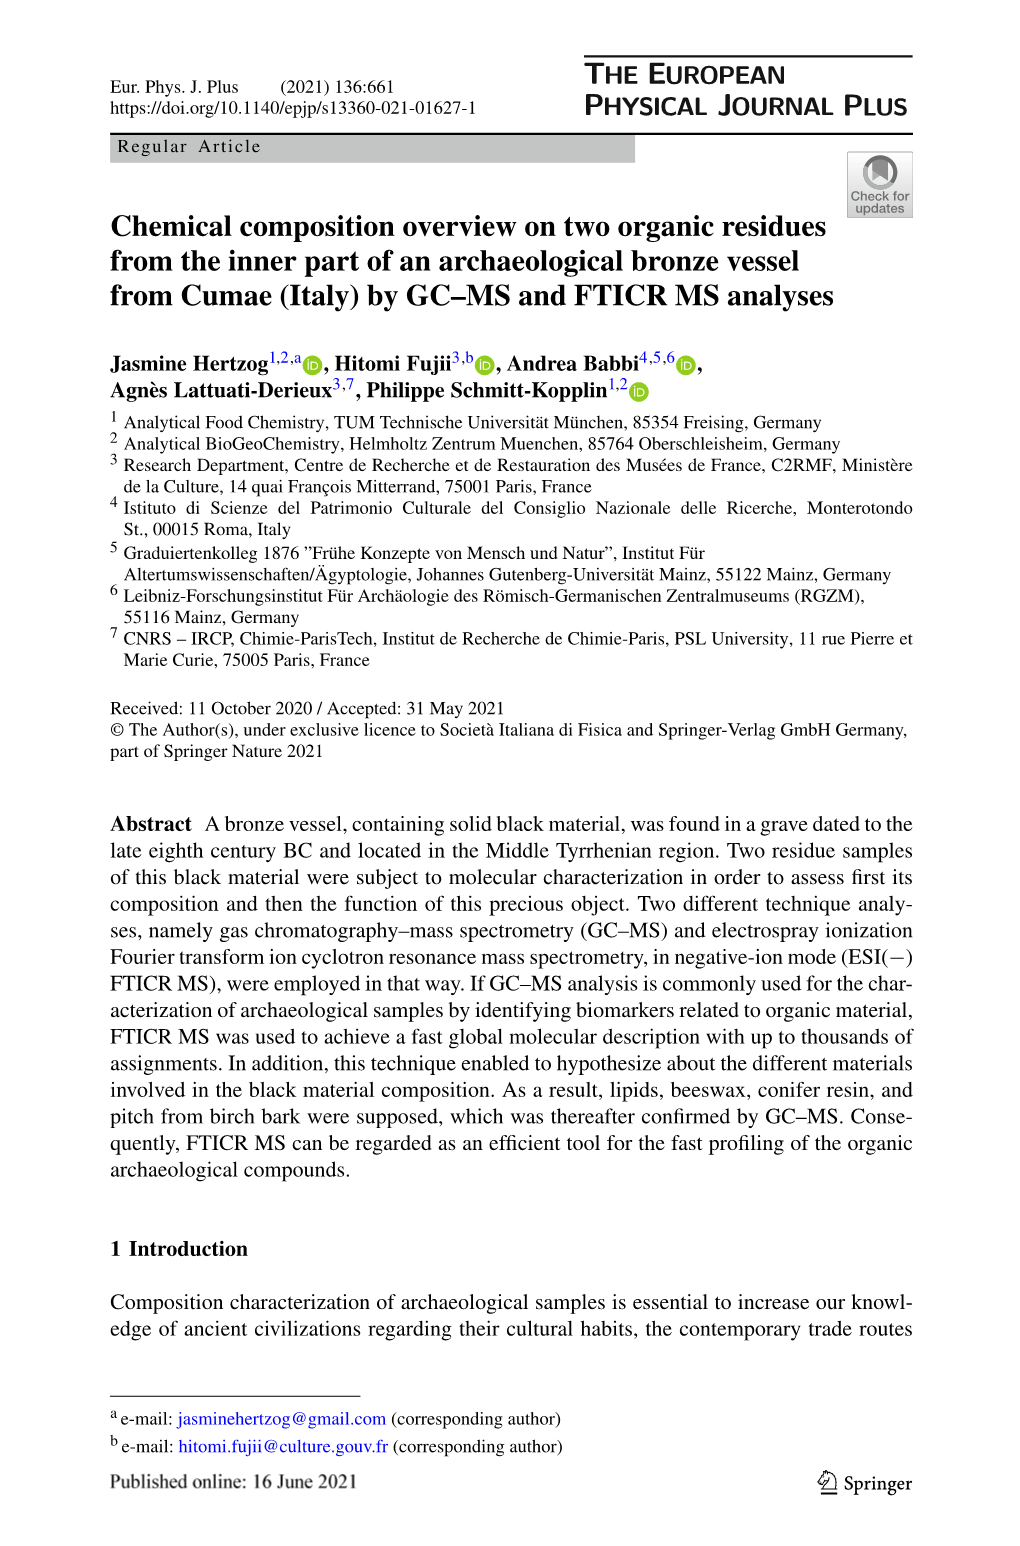 Chemical Composition Overview on Two Organic Residues from the Inner Part of an Archaeological Bronze Vessel from Cumae (Italy) by GC–MS and FTICR MS Analyses